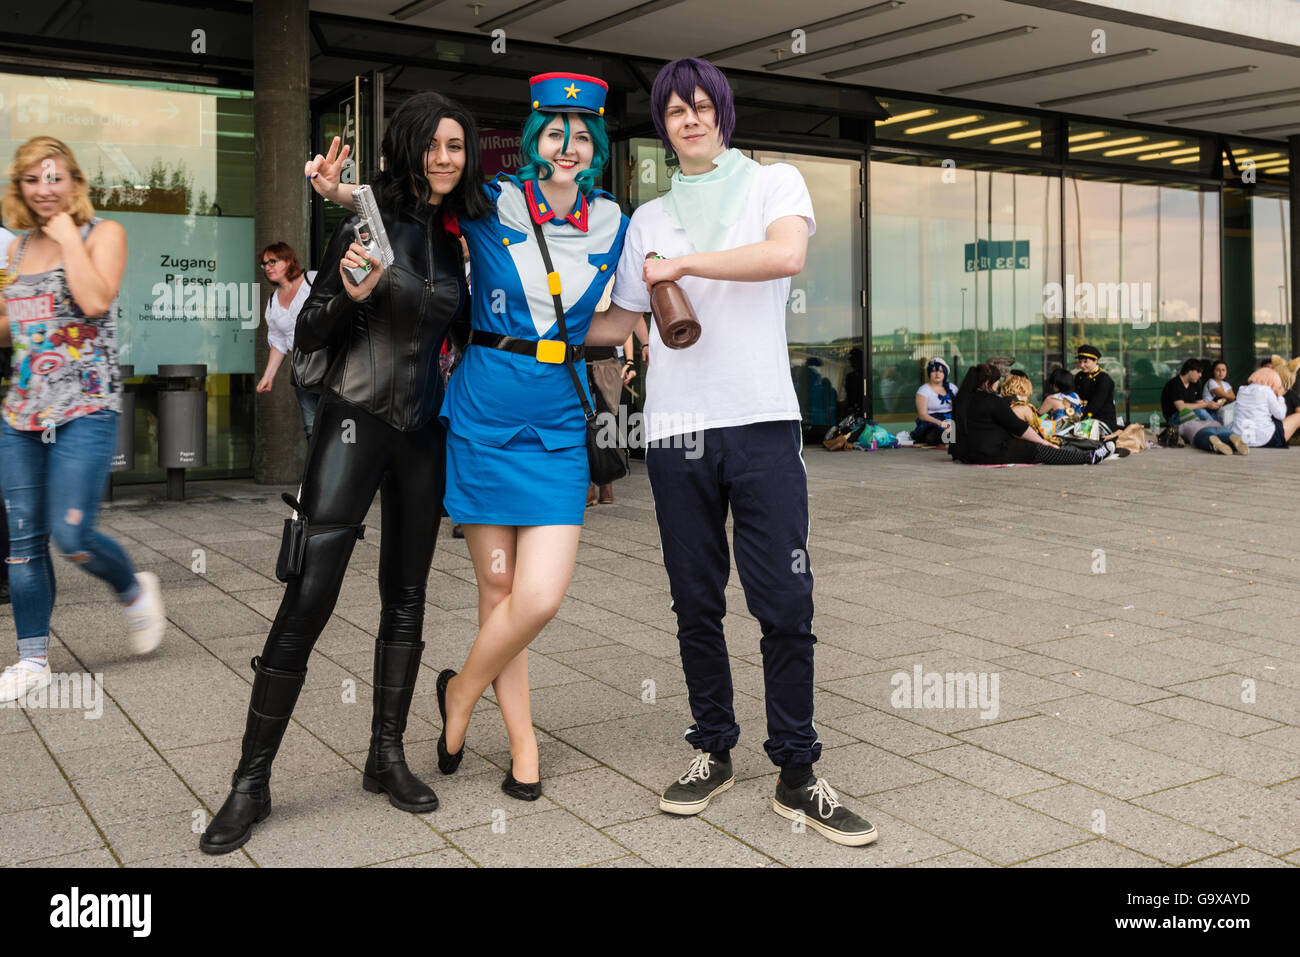 Stuttgart, Germany - June 25, 2016: Several cosplayers posing during the Comic Con Germany event in Stuttgart in front of the ex Stock Photo